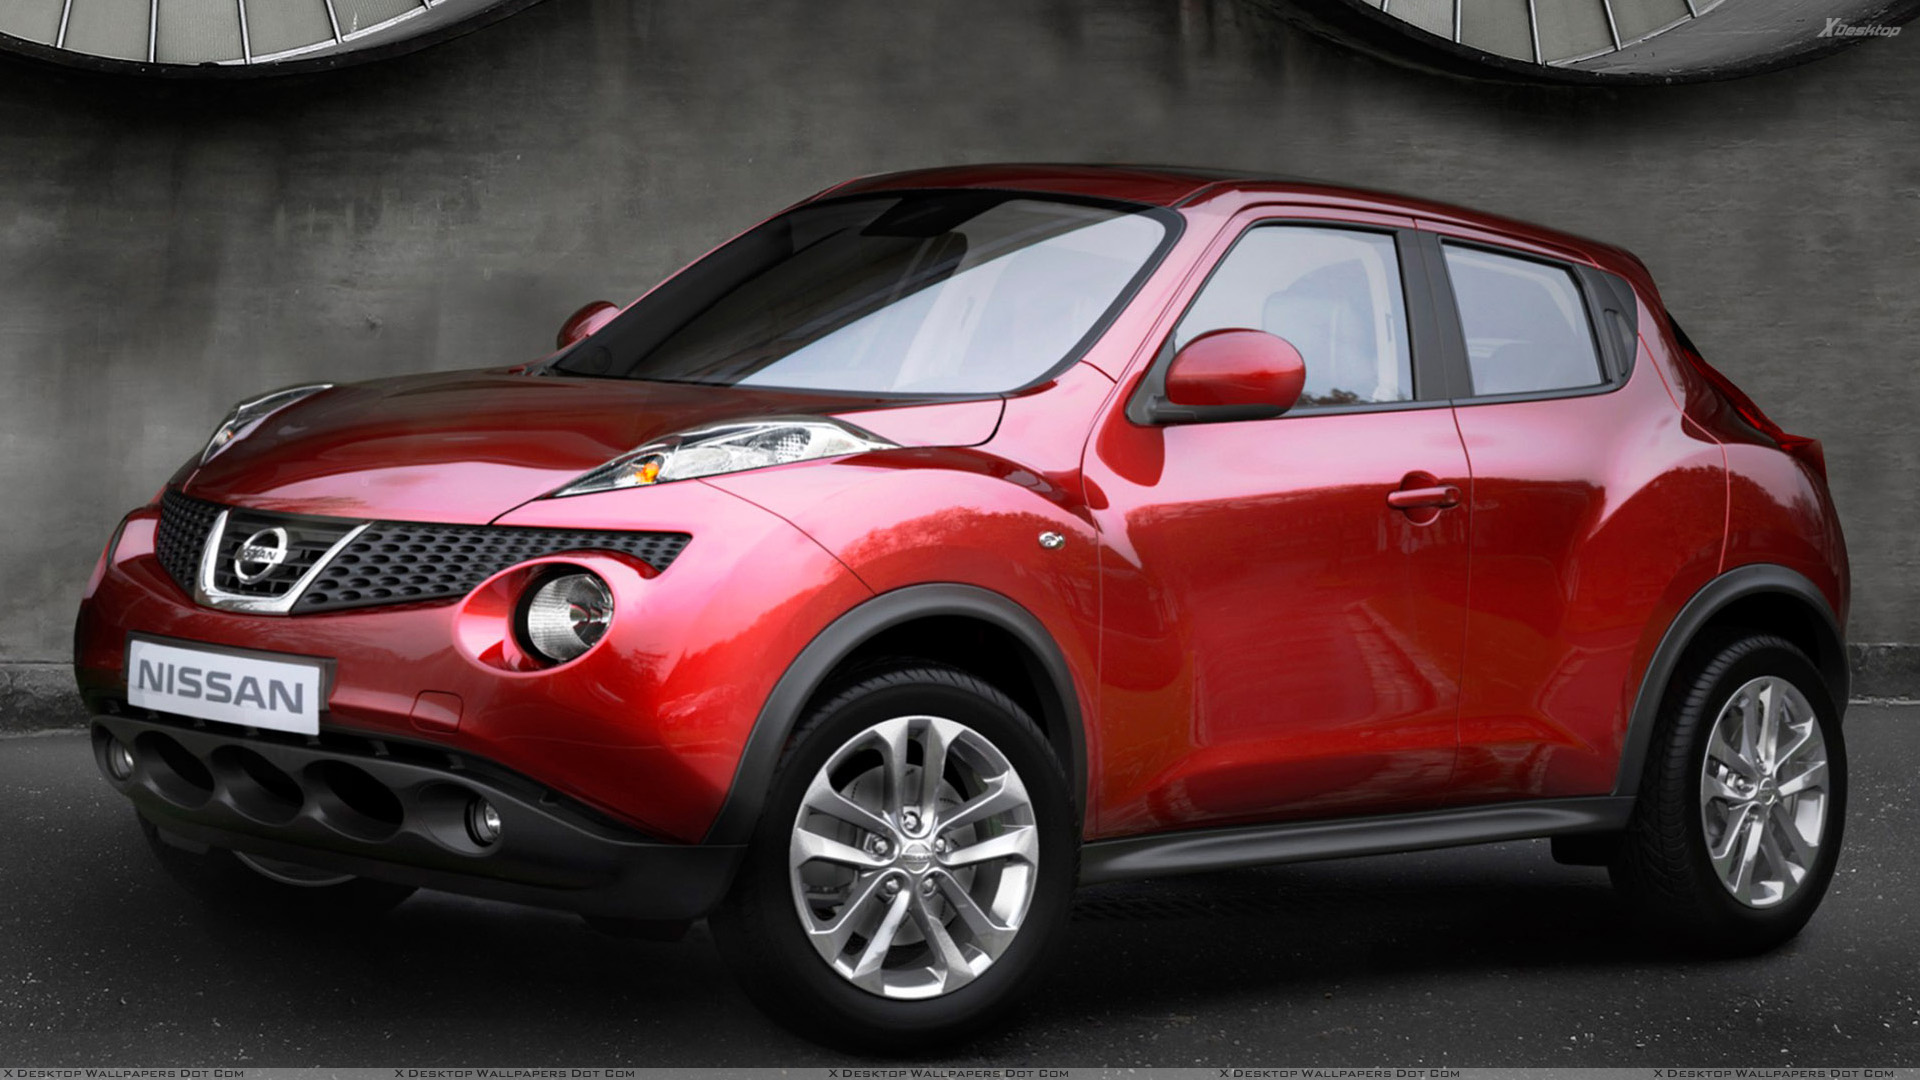 Nissan Juke 2008 Review, Amazing Pictures and Images